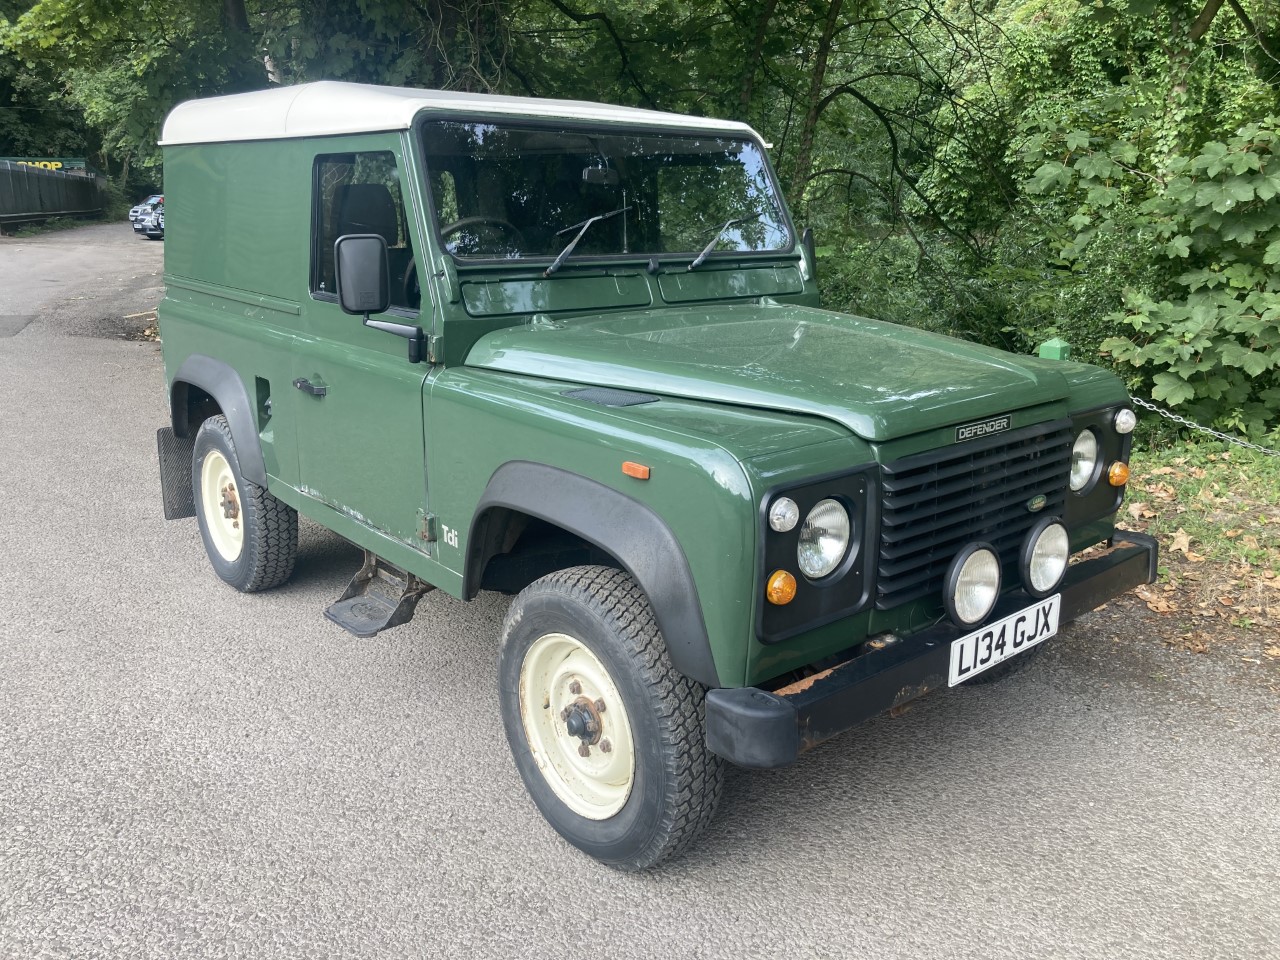 L134 GJX – 1993 Defender 90 – Available as is or refurbished to your own  specification